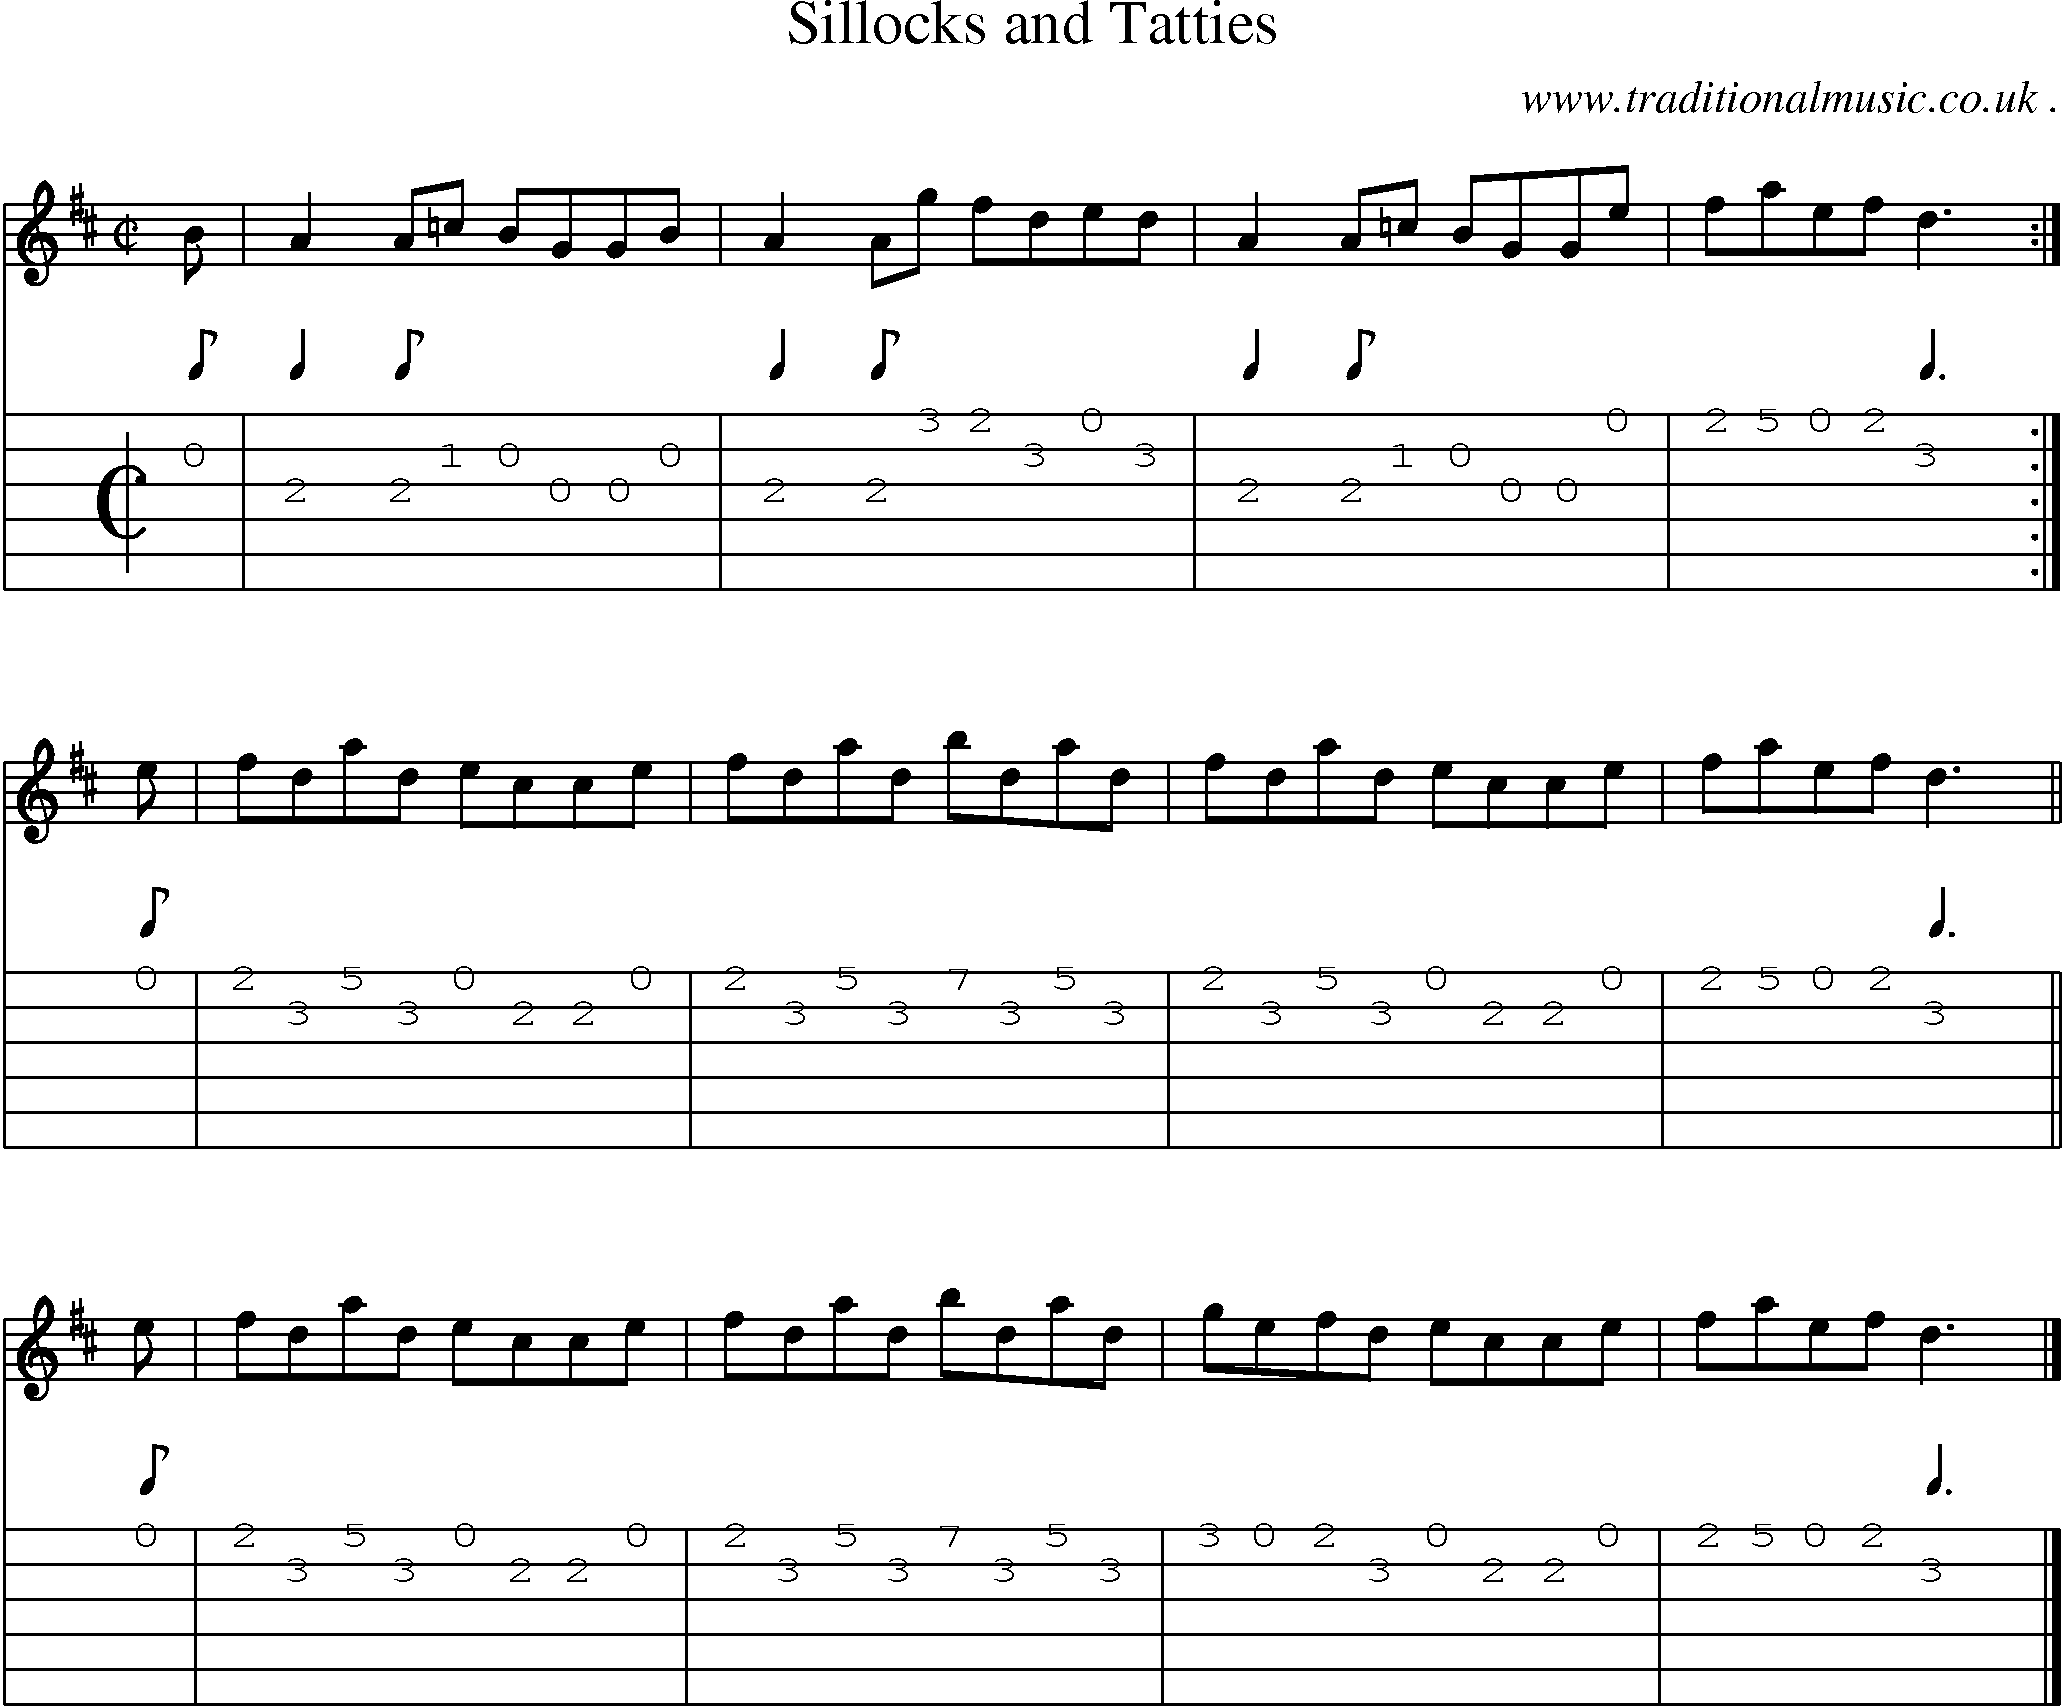 Sheet-music  score, Chords and Guitar Tabs for Sillocks And Tatties